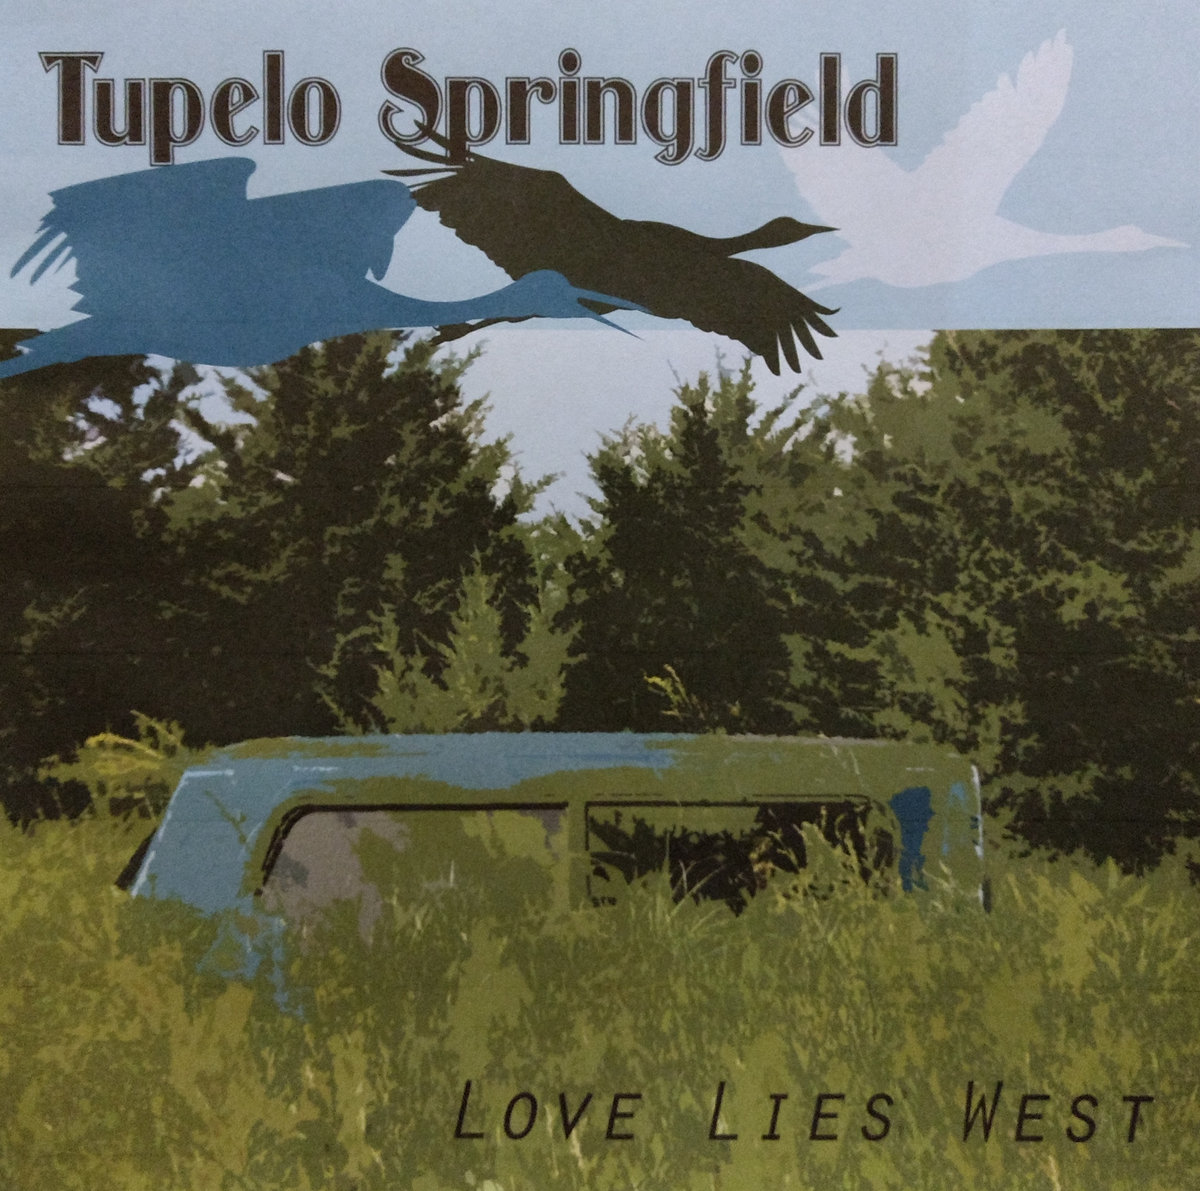 Album art for Tupelo Springfield's new EP featuring silhouettes of geese and an old car